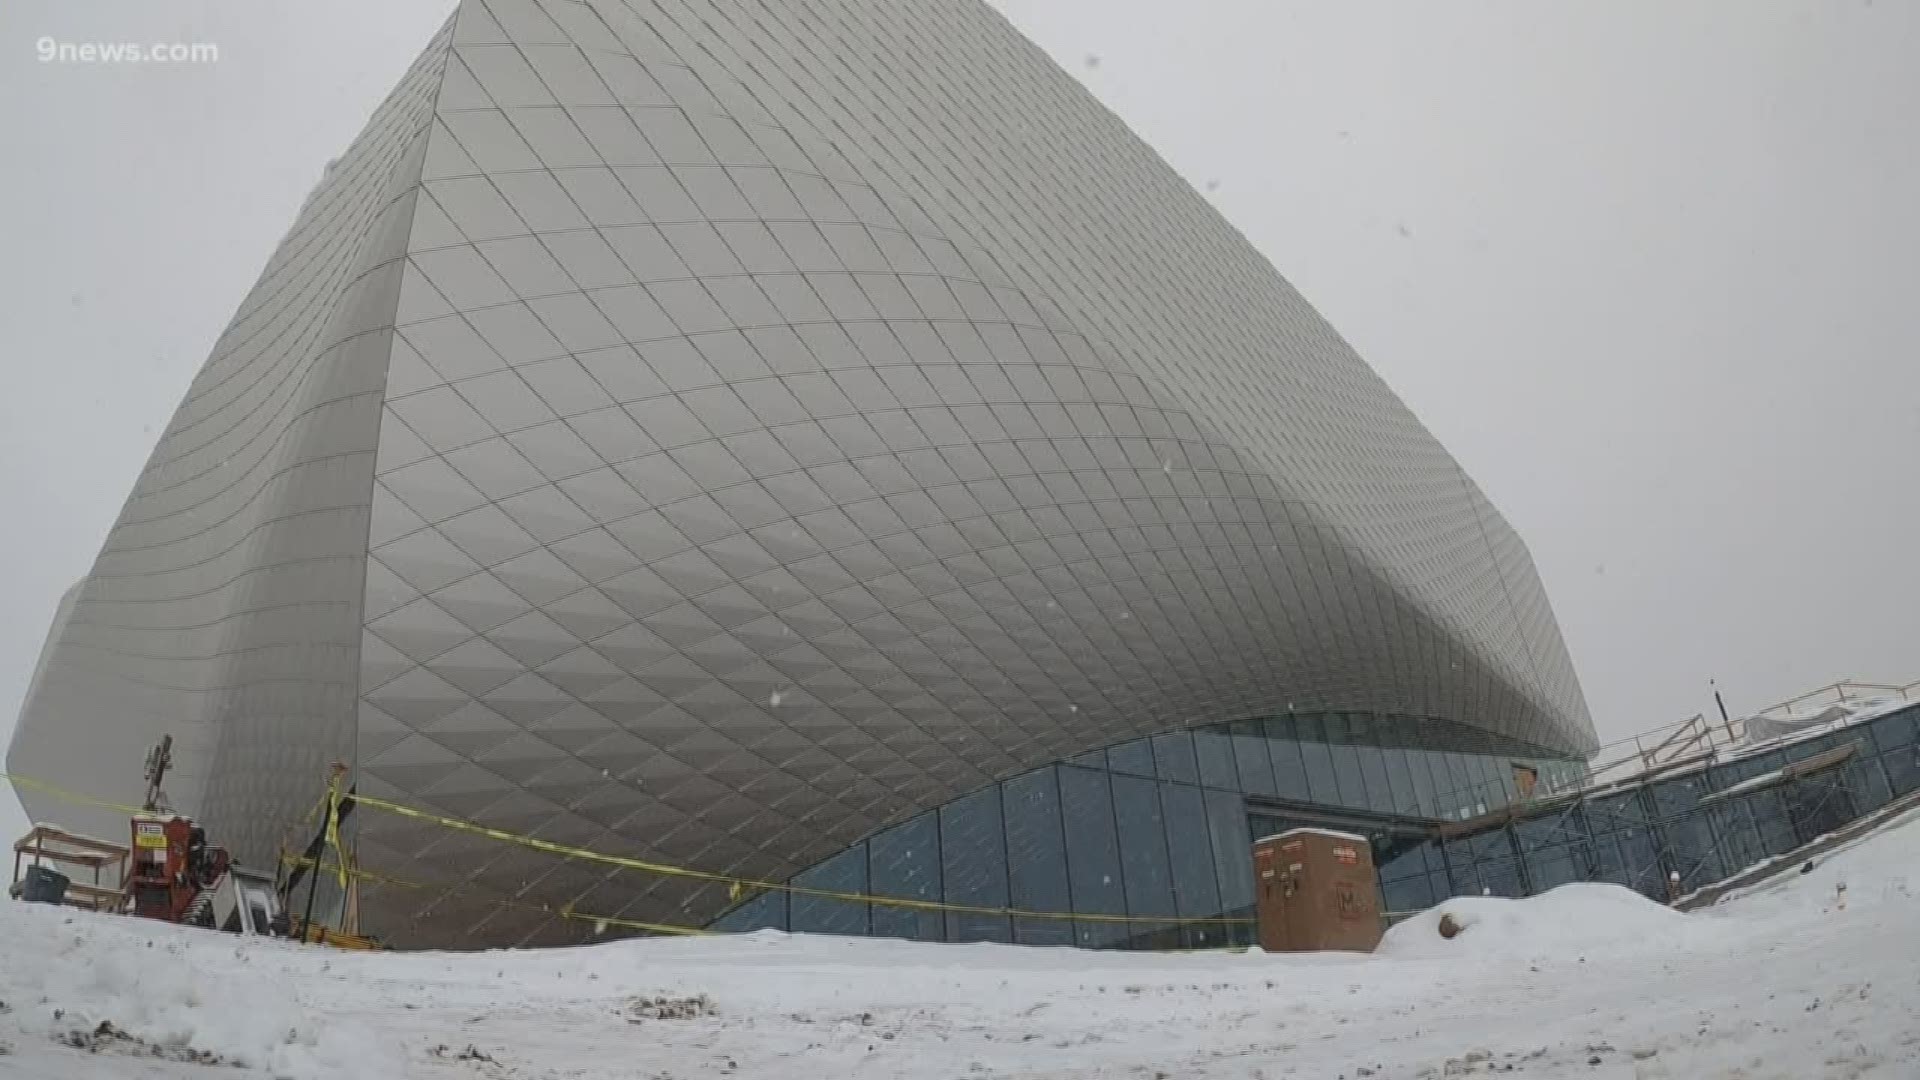 The museum will highlight the Olympic movement and spirit, and also shine a light on American athletes who have competed in the games. It is expected to open in May.